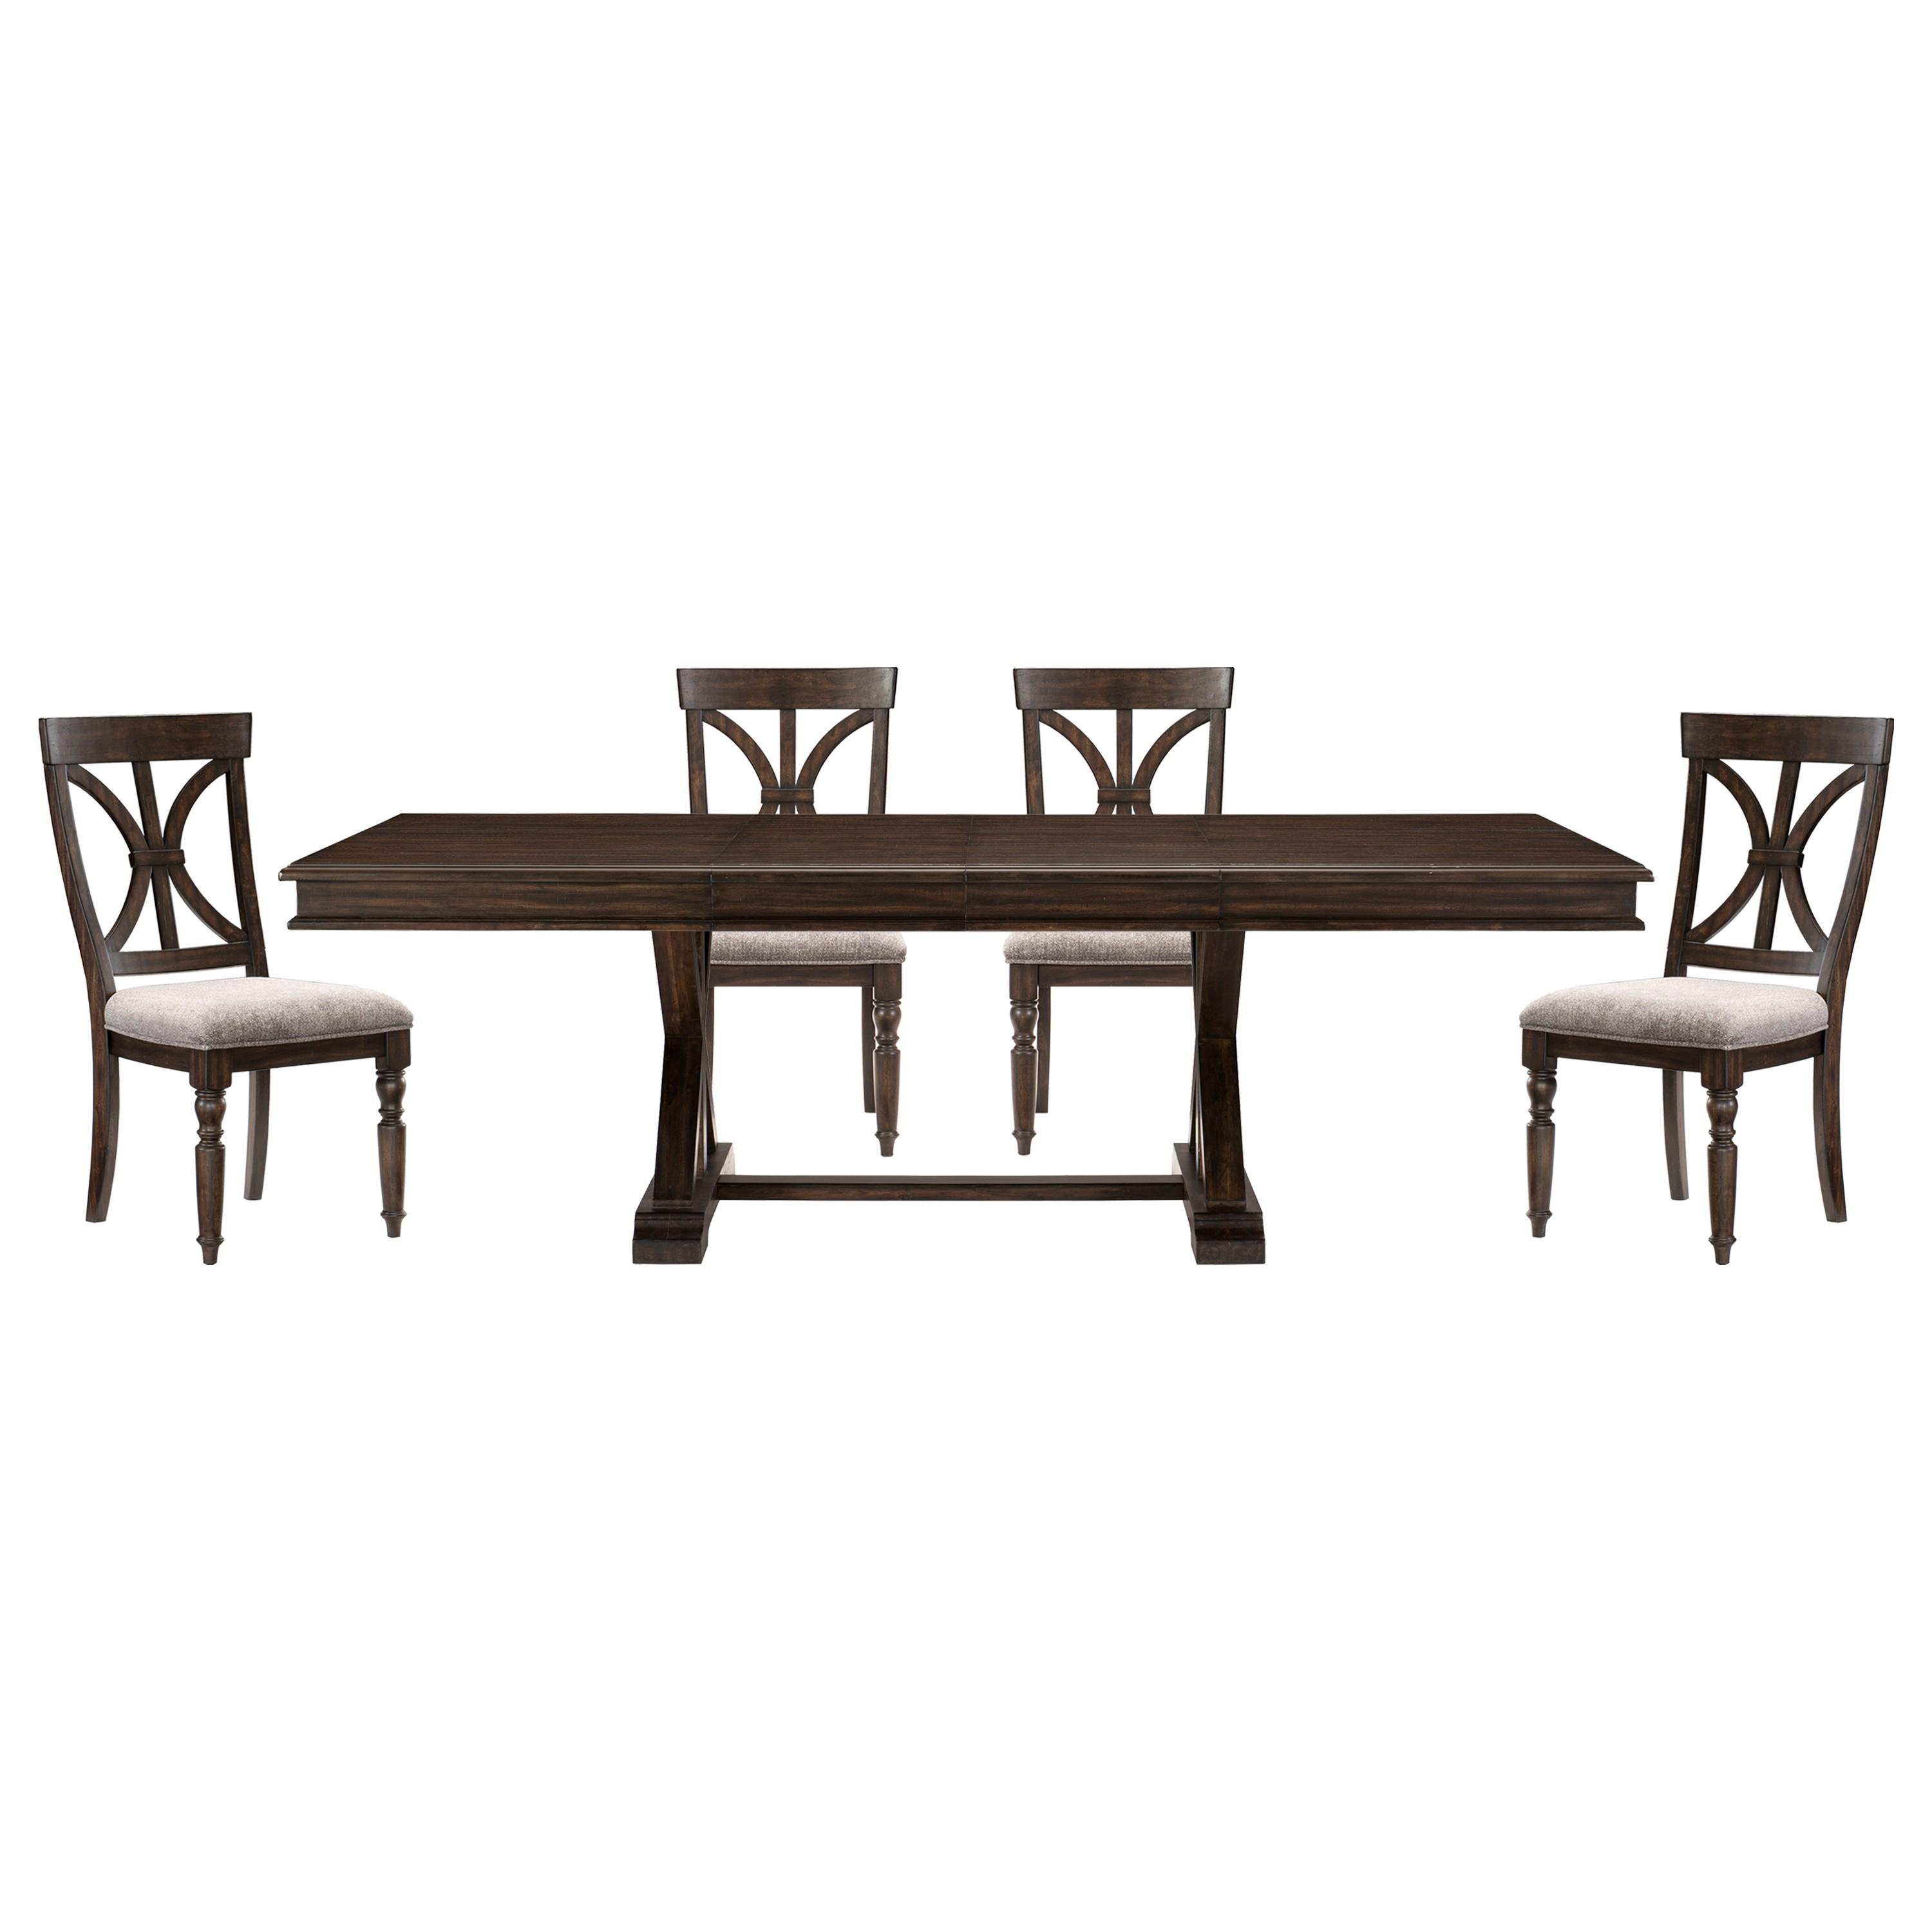 Transitional Dining Room Set 1689-96*5PC Cardano 1689-96*5PC in Charcoal 